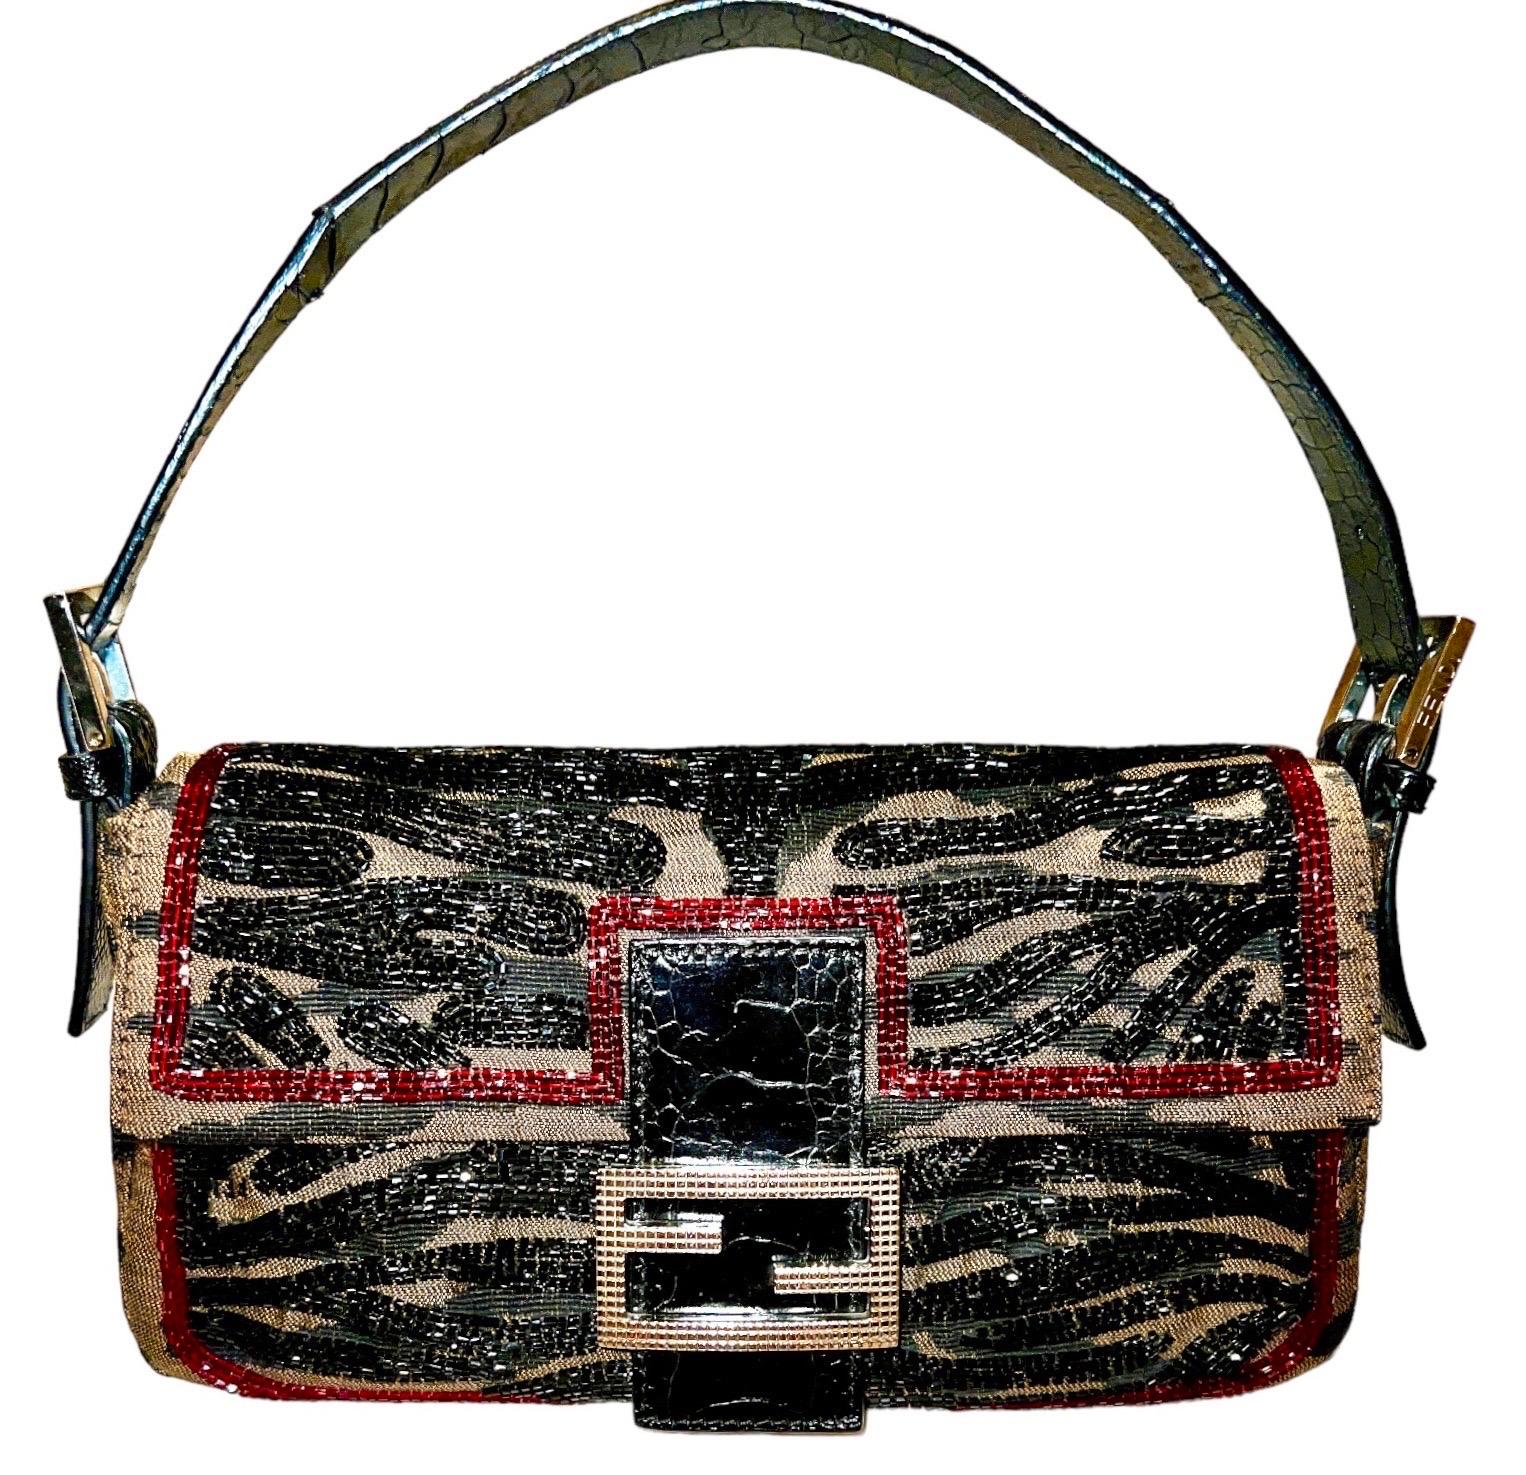 FENDI Embroidered Baguette Handbag Flap Bag Clutch - Full Set In Good Condition For Sale In Switzerland, CH